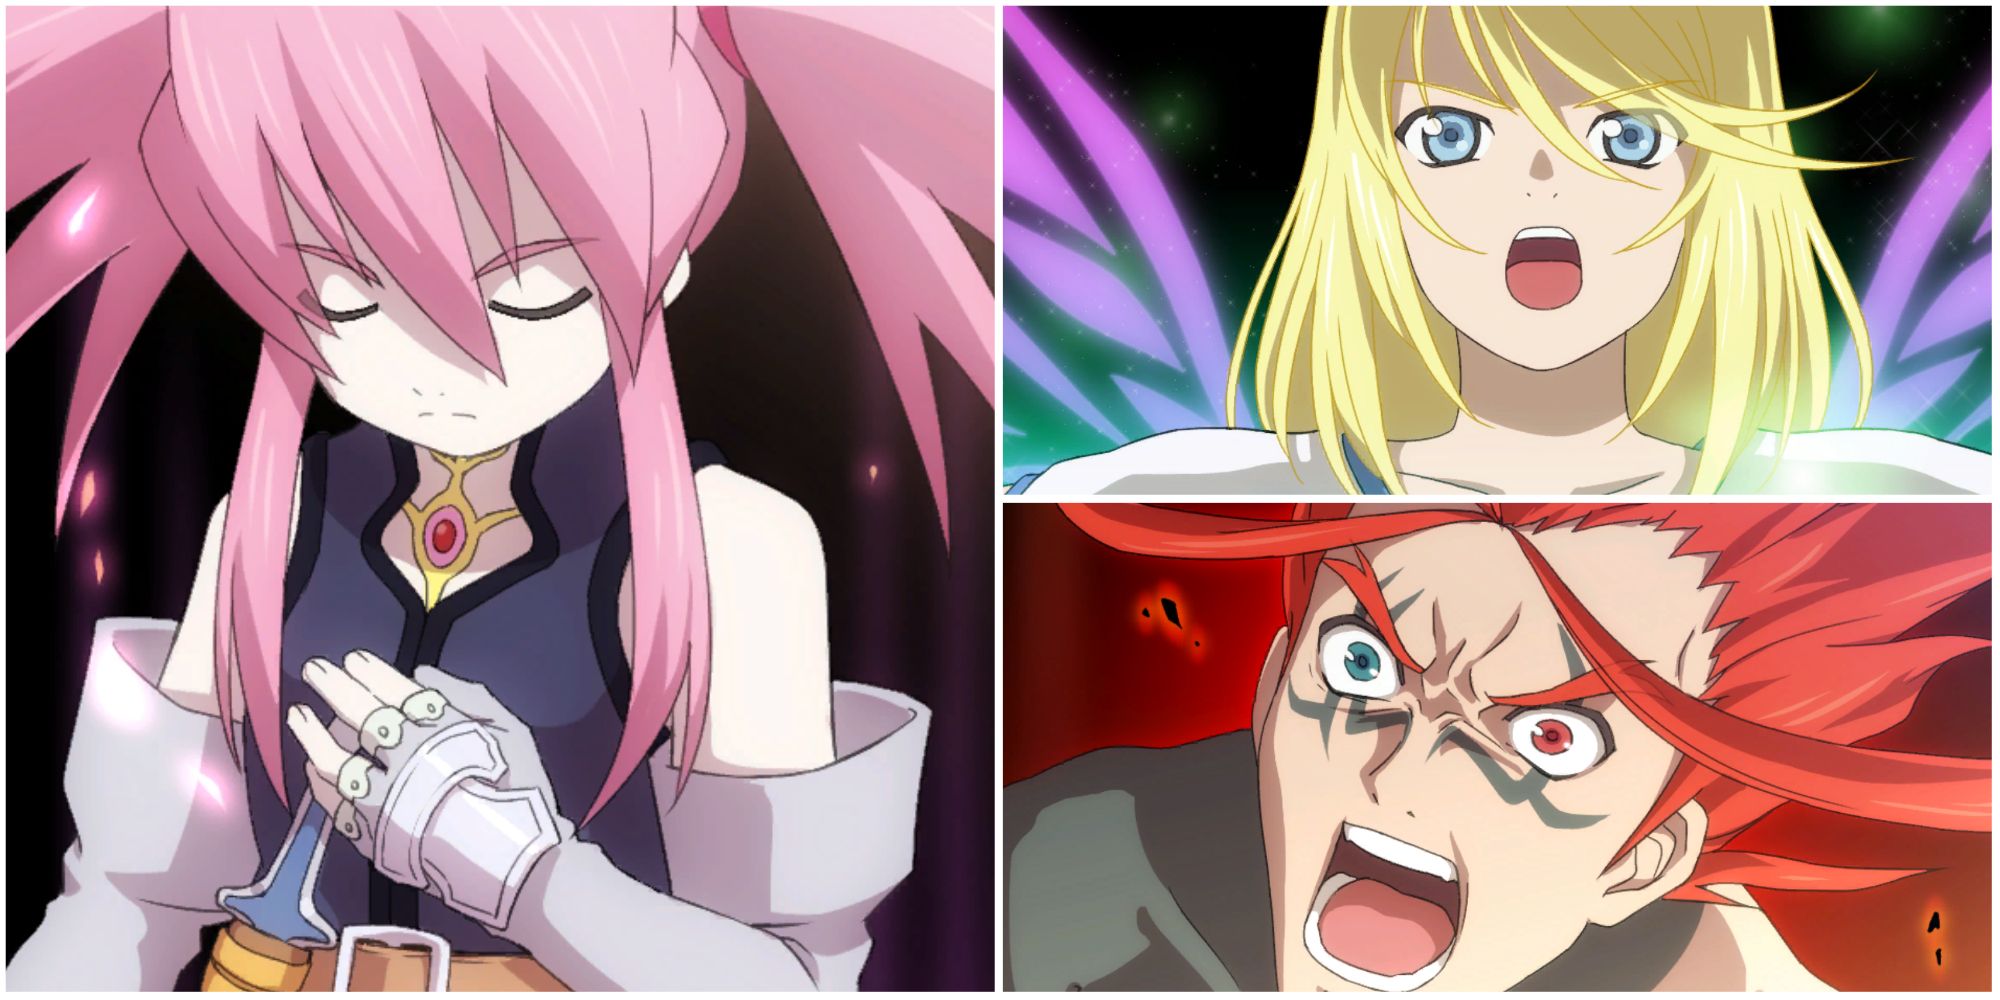 A collage of images showcasing the Cut-Ins from Character's Mystic Artes in Tales of Symphonia Remastered. The leftmost image is of Presea with her left hand over her heart. The top right is of Colette sprouting her wings with a determined look on her face. The bottom right is of the boss Abyssion performing his Holy Blade Mystic Arte.